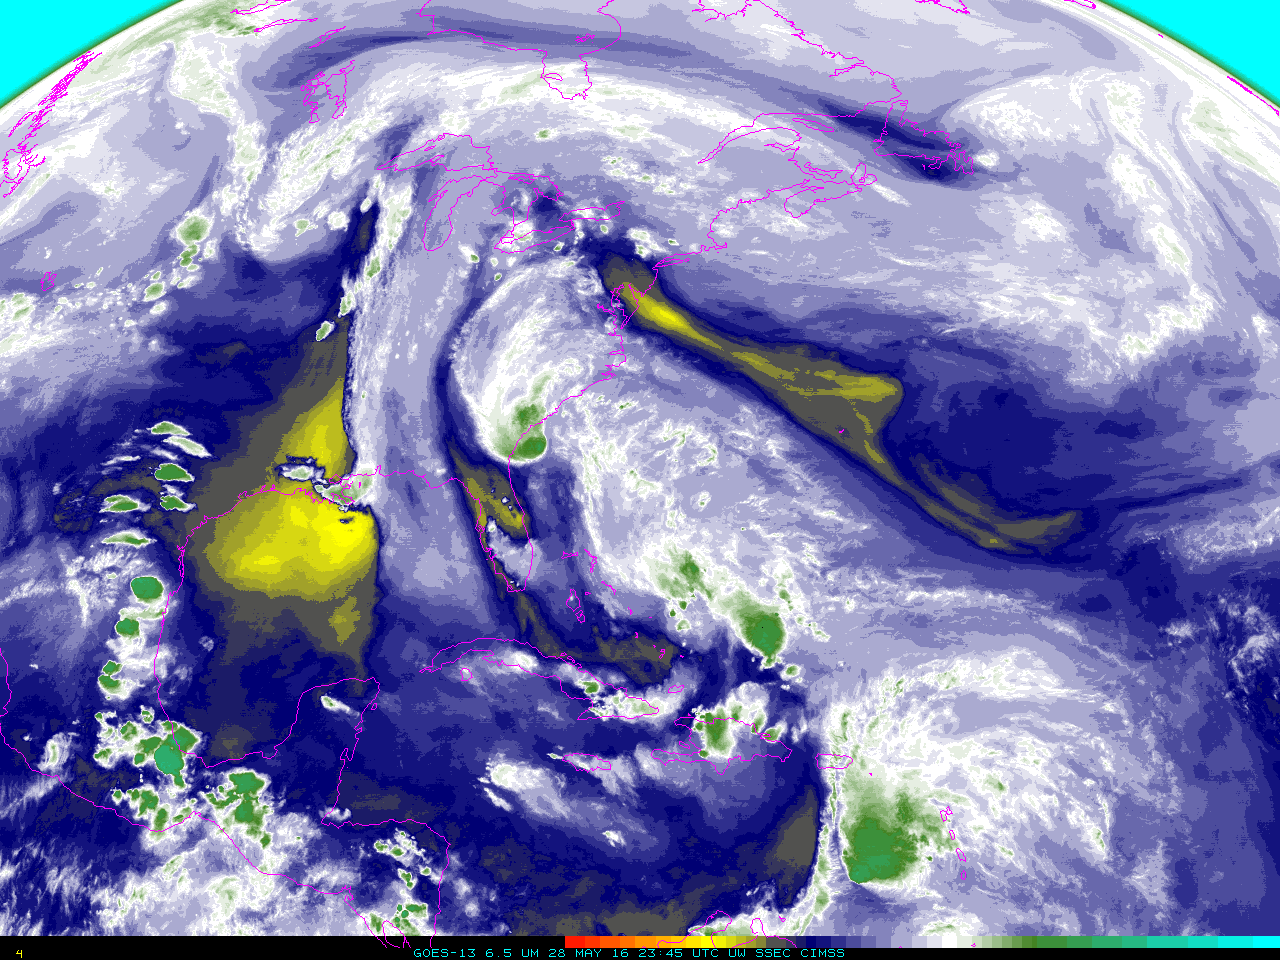 GOES-13 6.5 µm Water Vapor Infrared images [click to play animation]